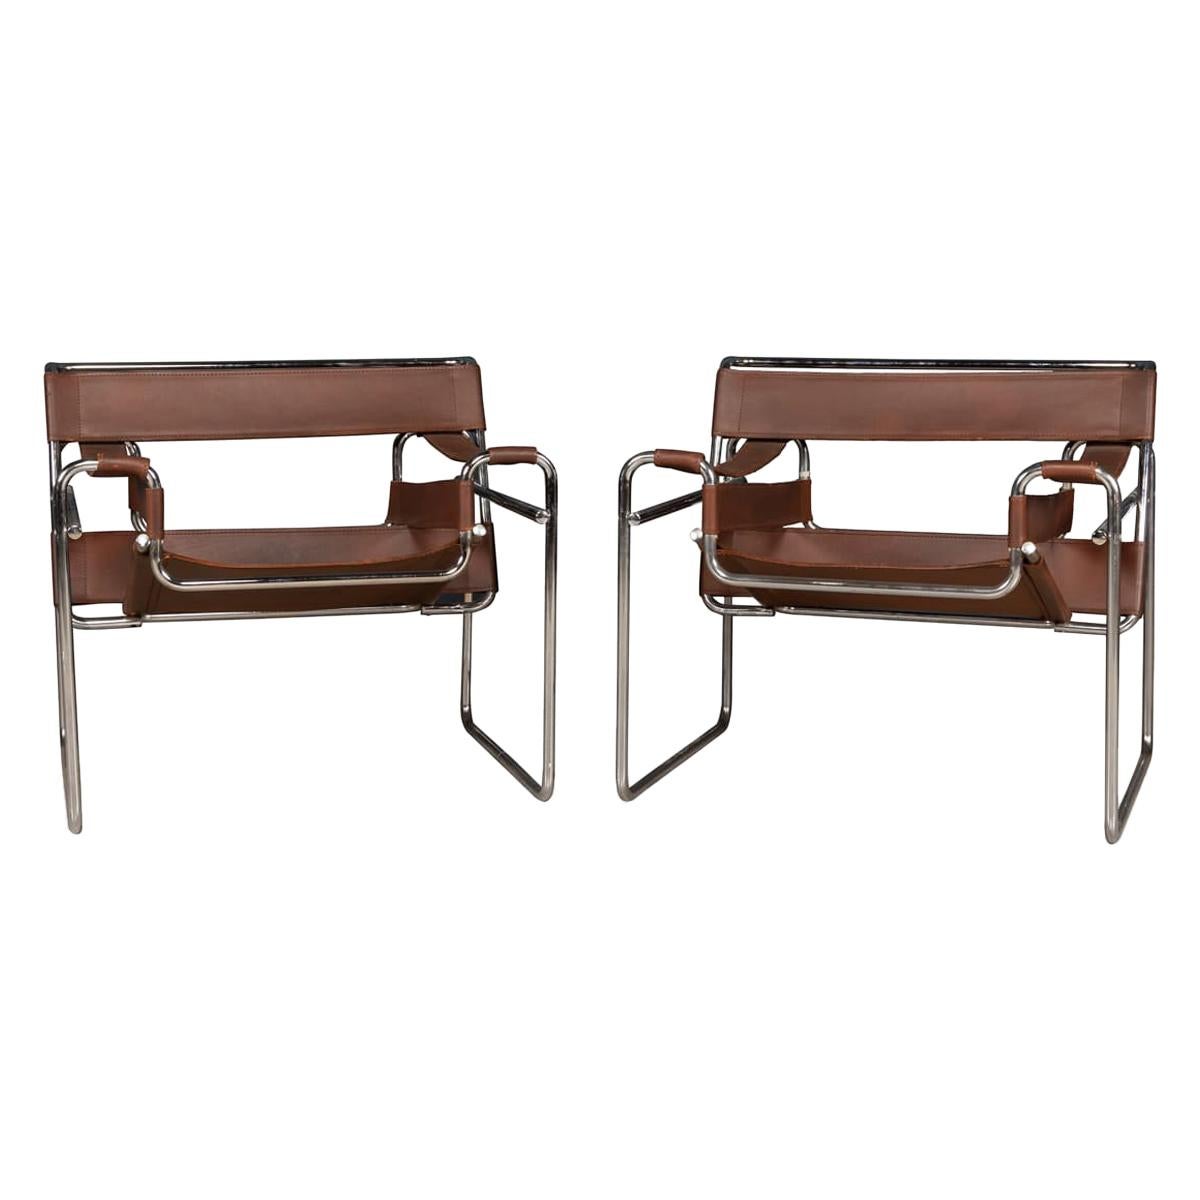 Pair of Chrome Plated & Leather Wassily Chairs, circa 1980